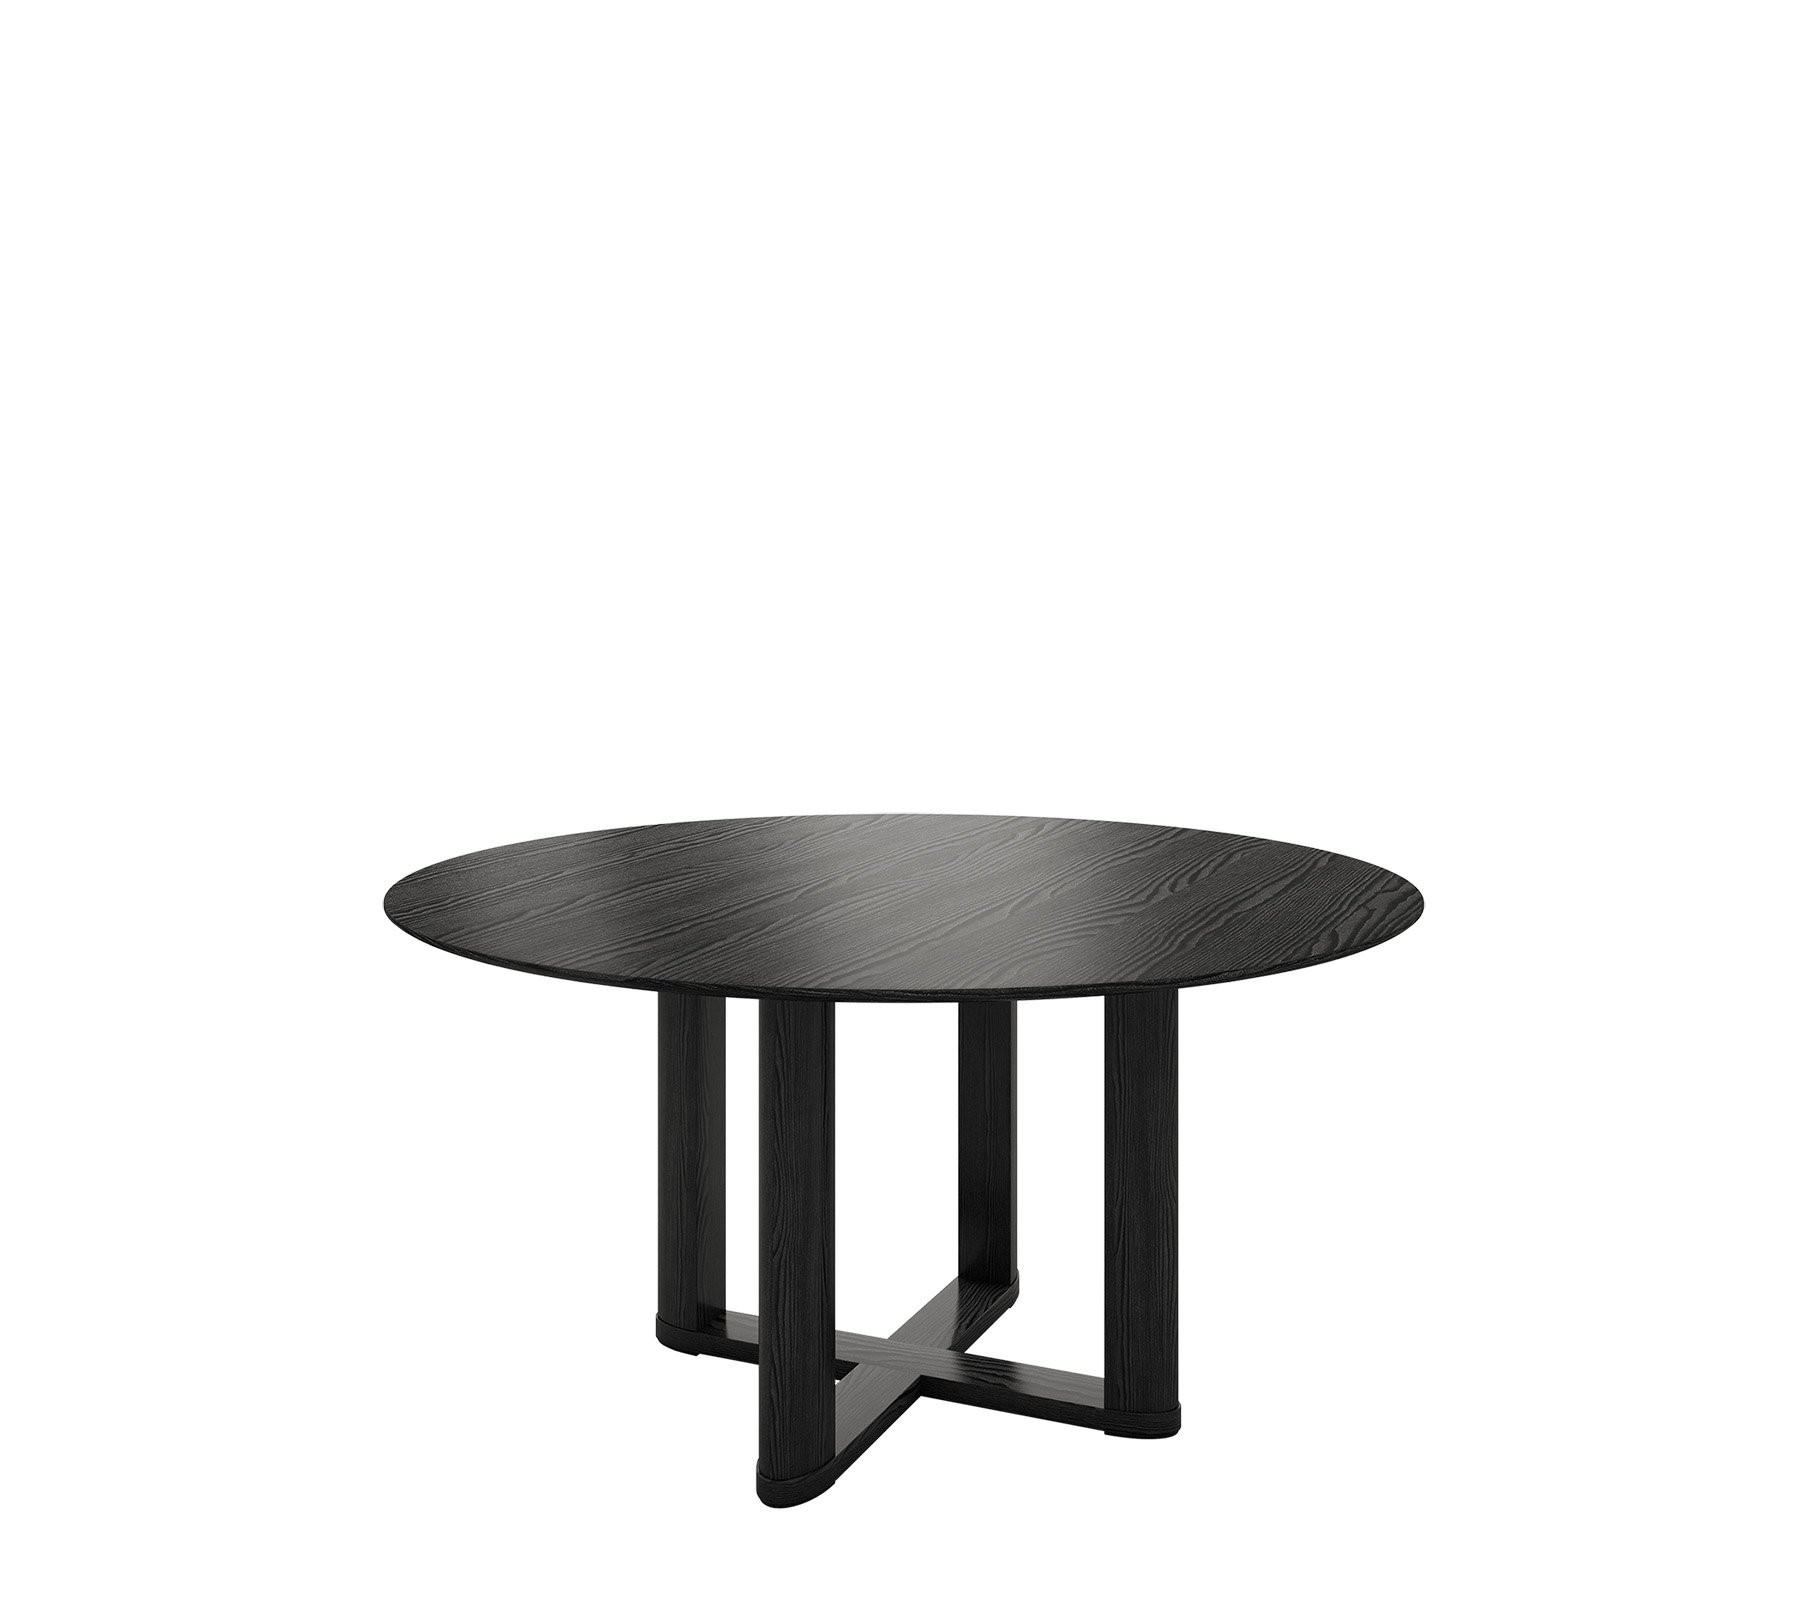 HULL DINING TABLE - 60" ROUND - $7,088